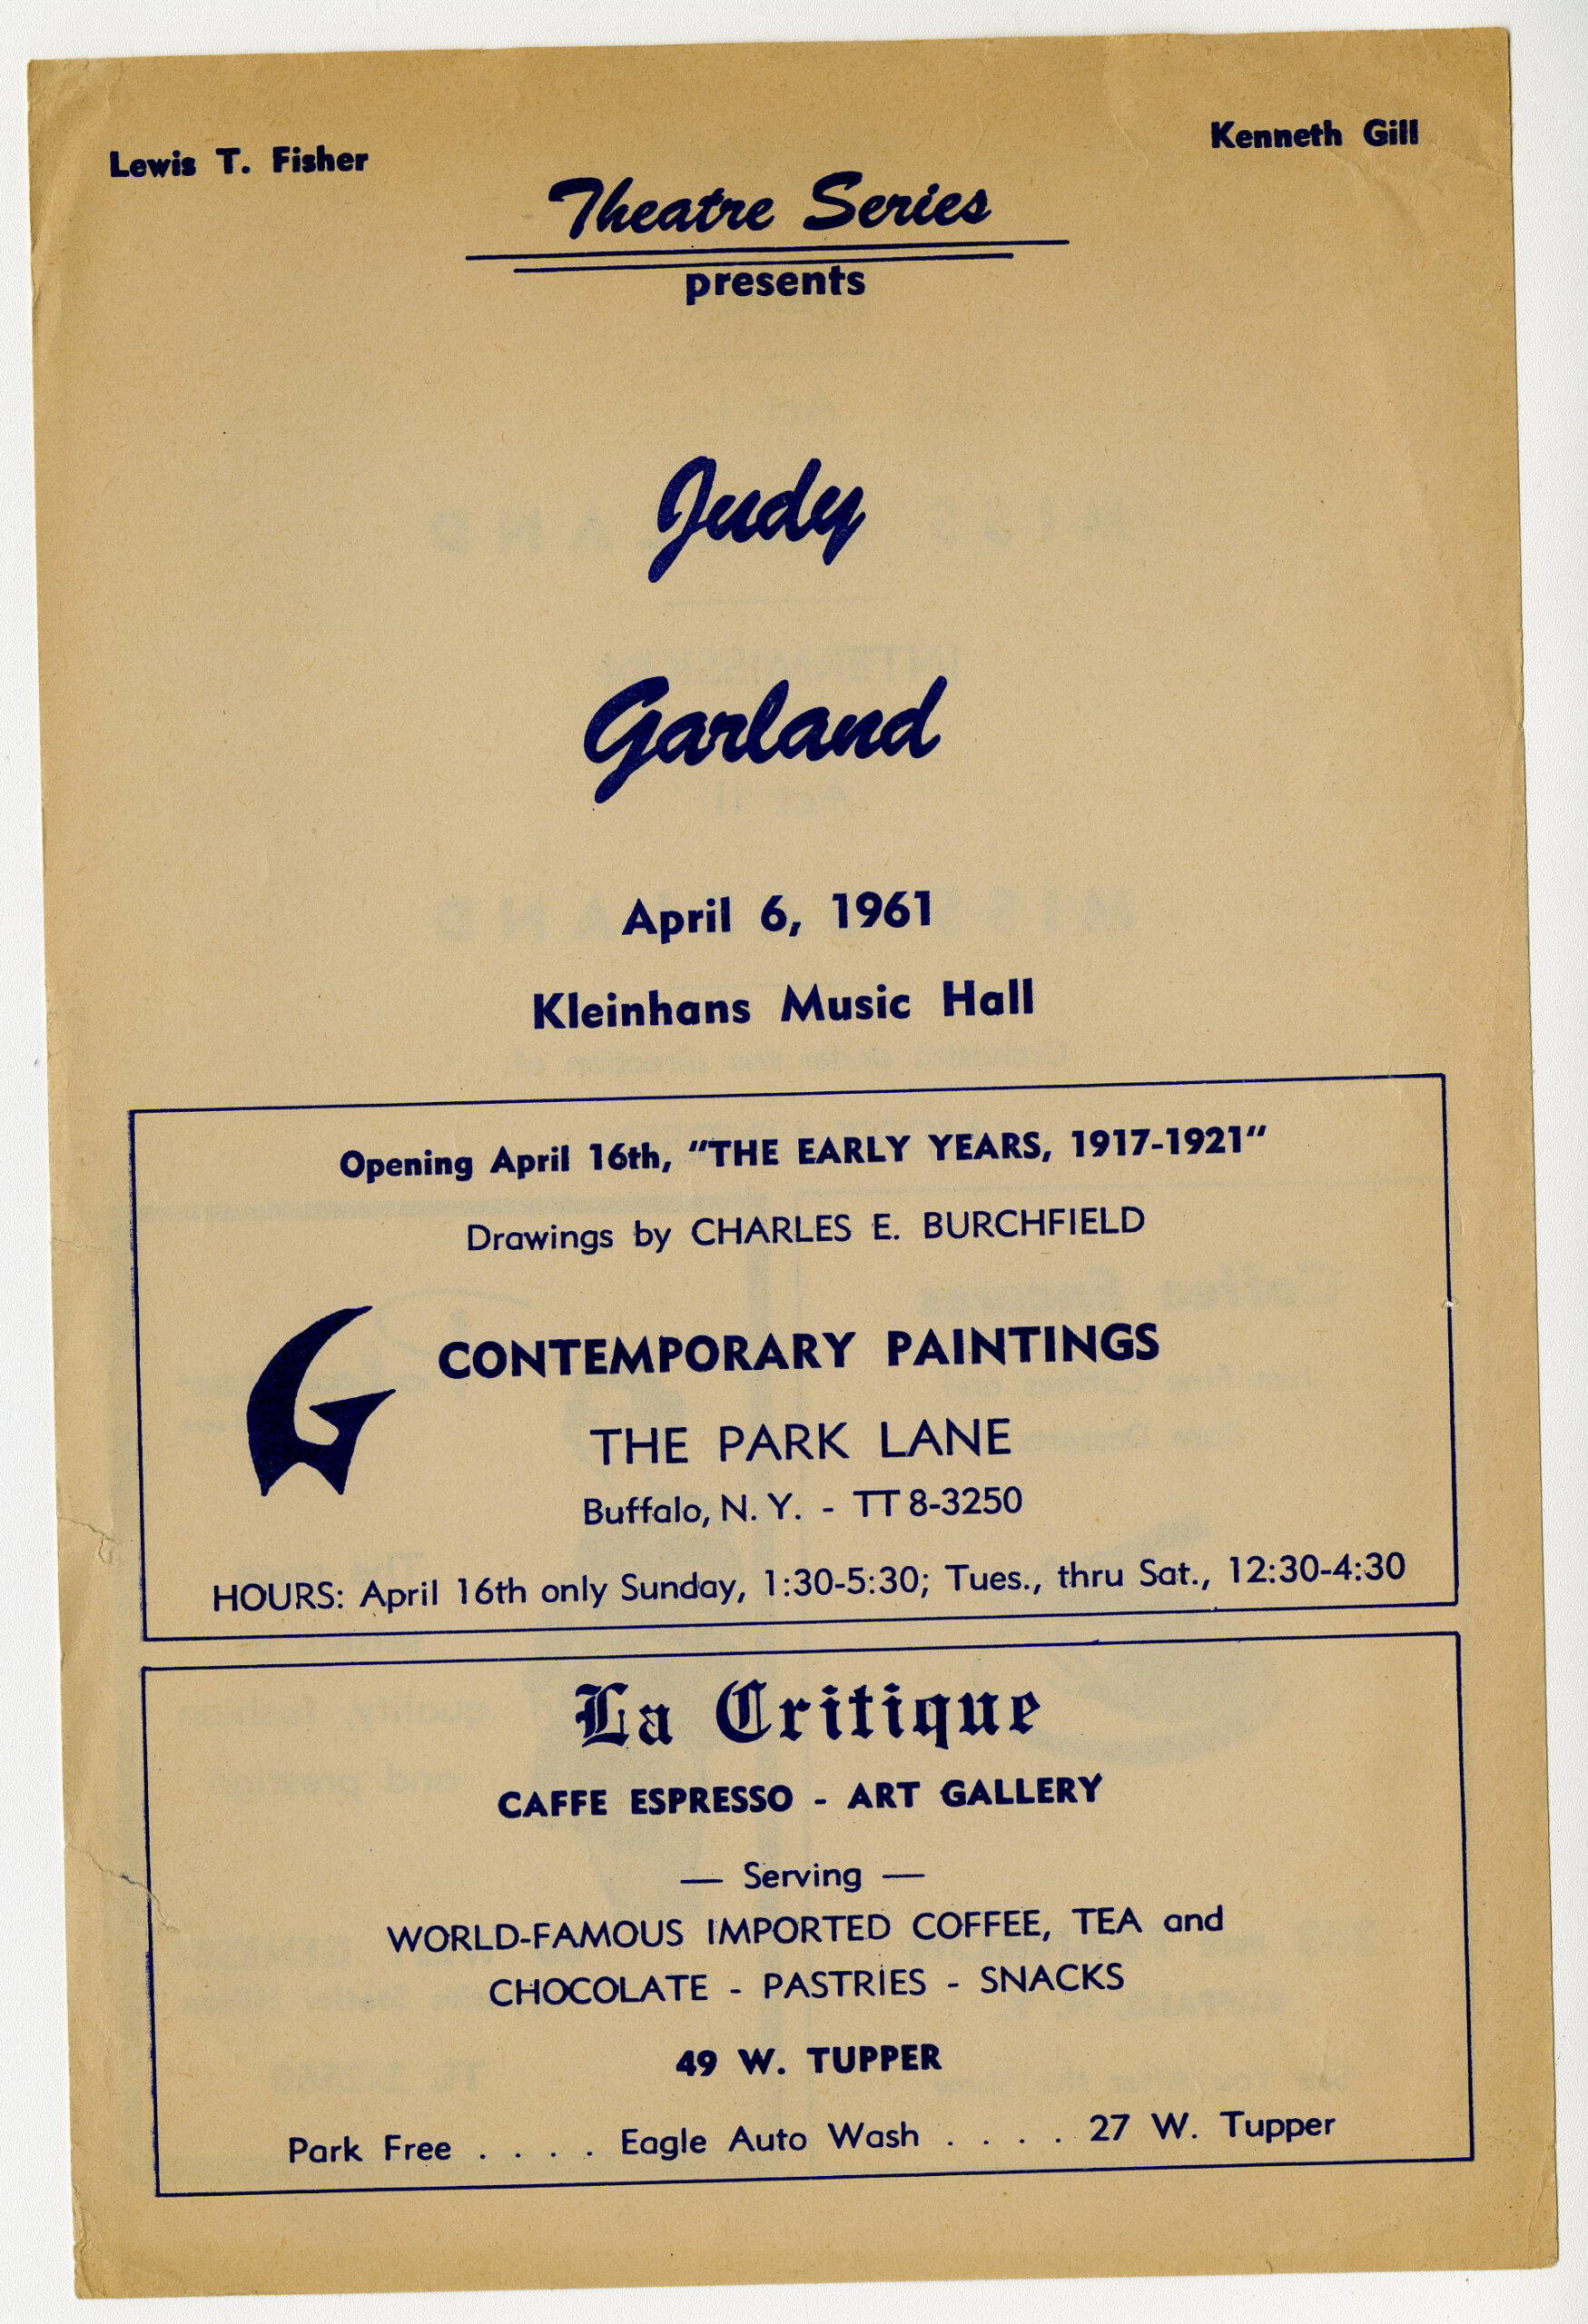 A cream-coloured programme from a performance by Judy Garland at Kleinhans Music Hall, featuring information about the performance.